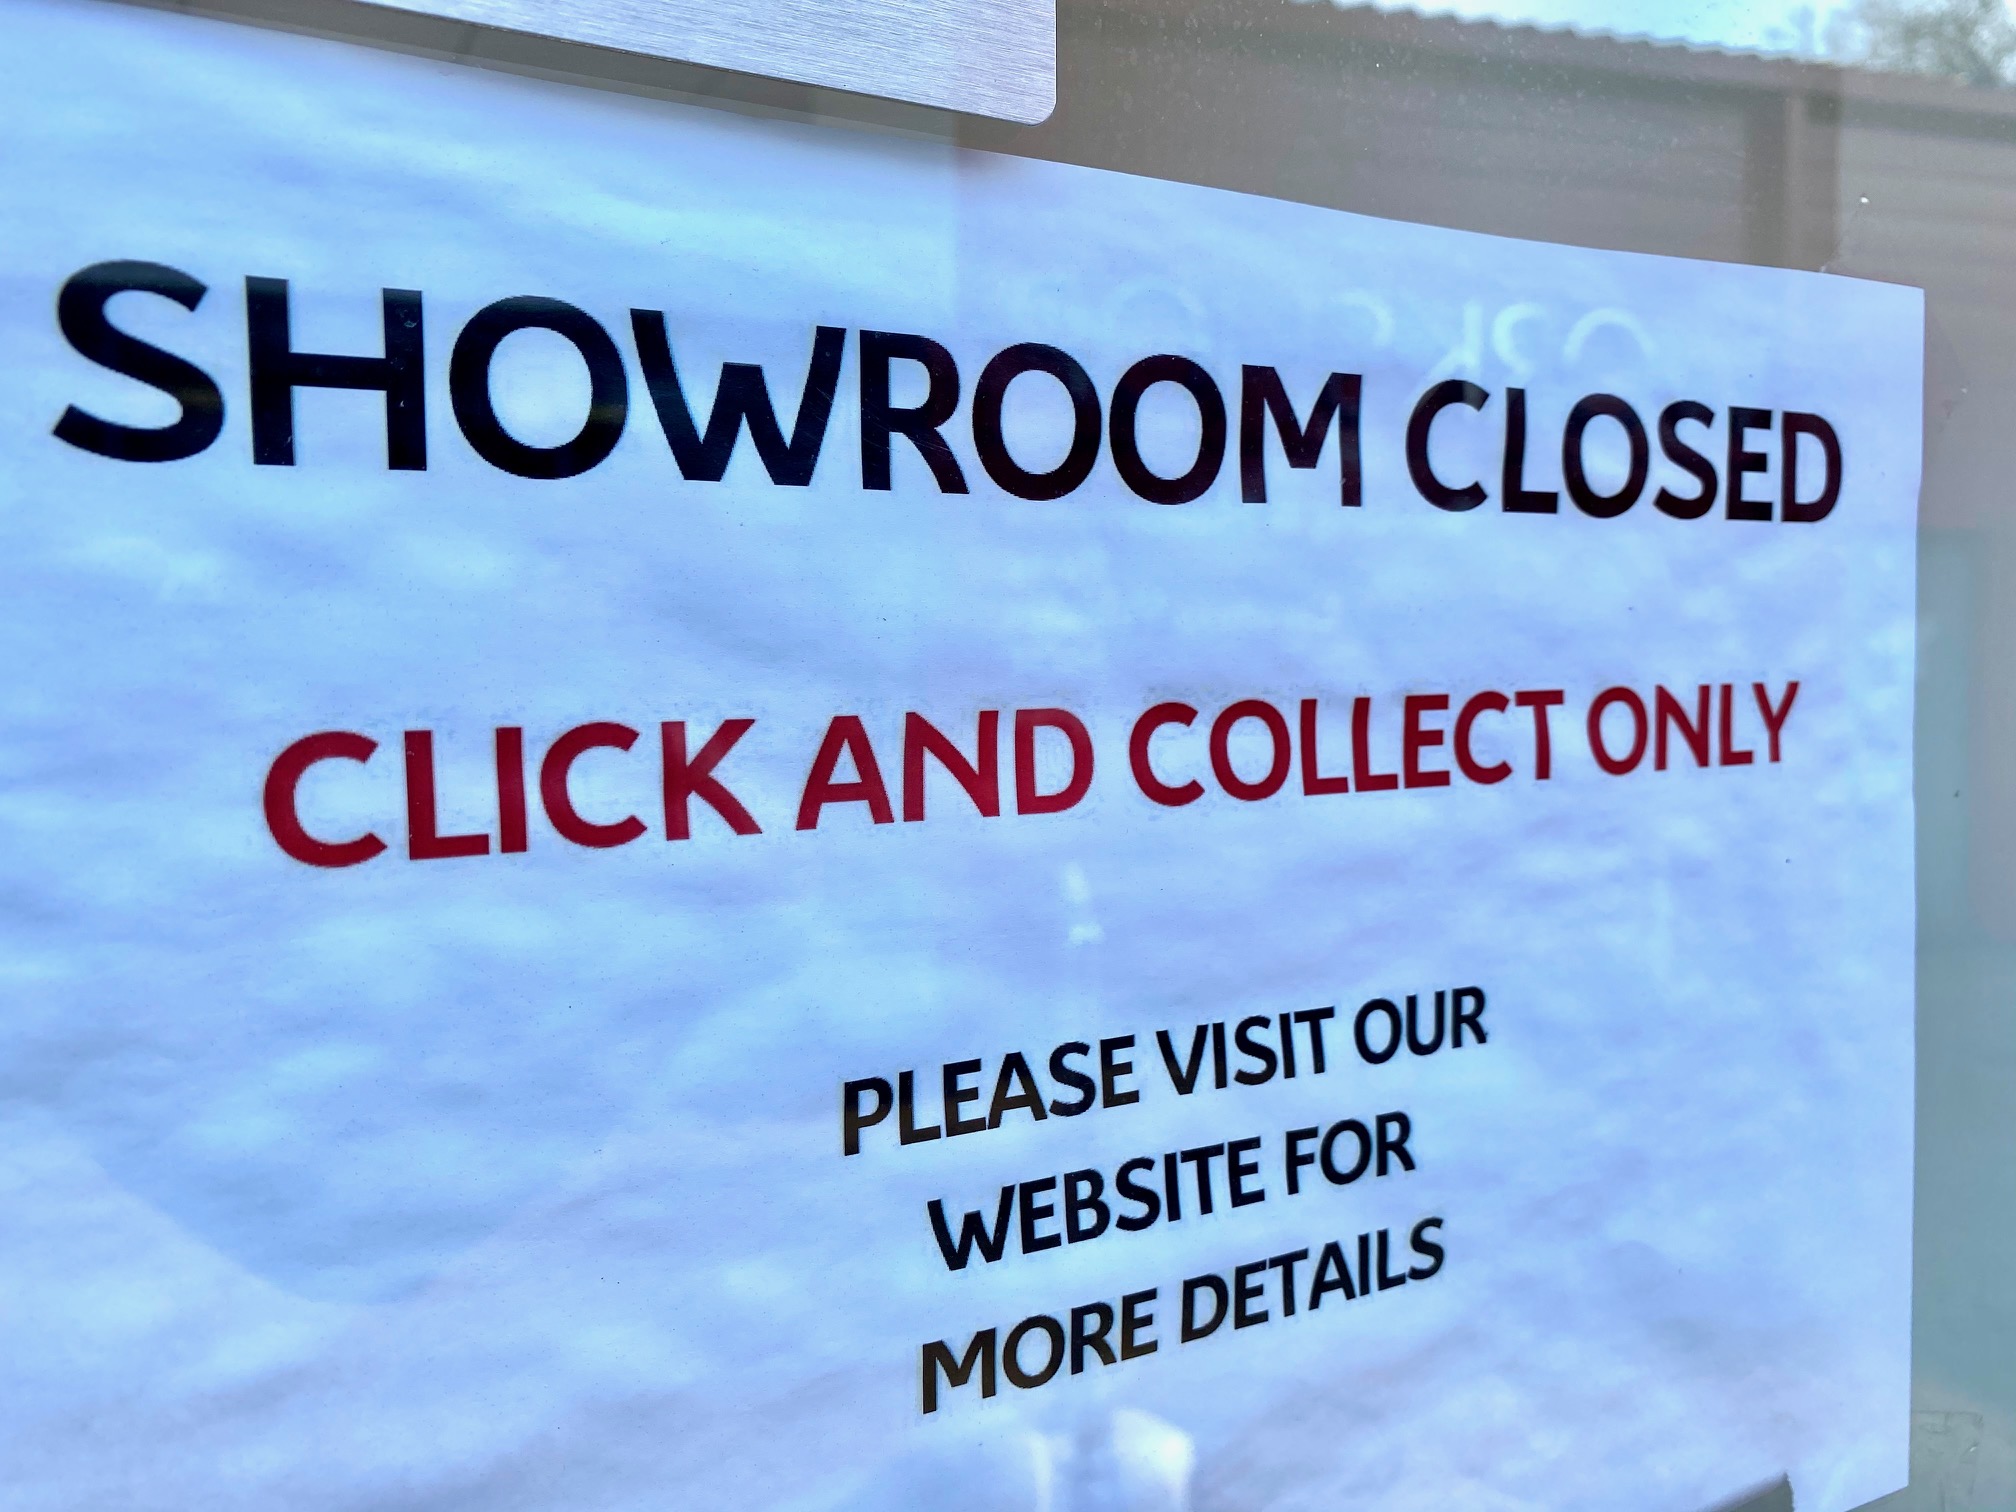 Click and collect car showroom sign